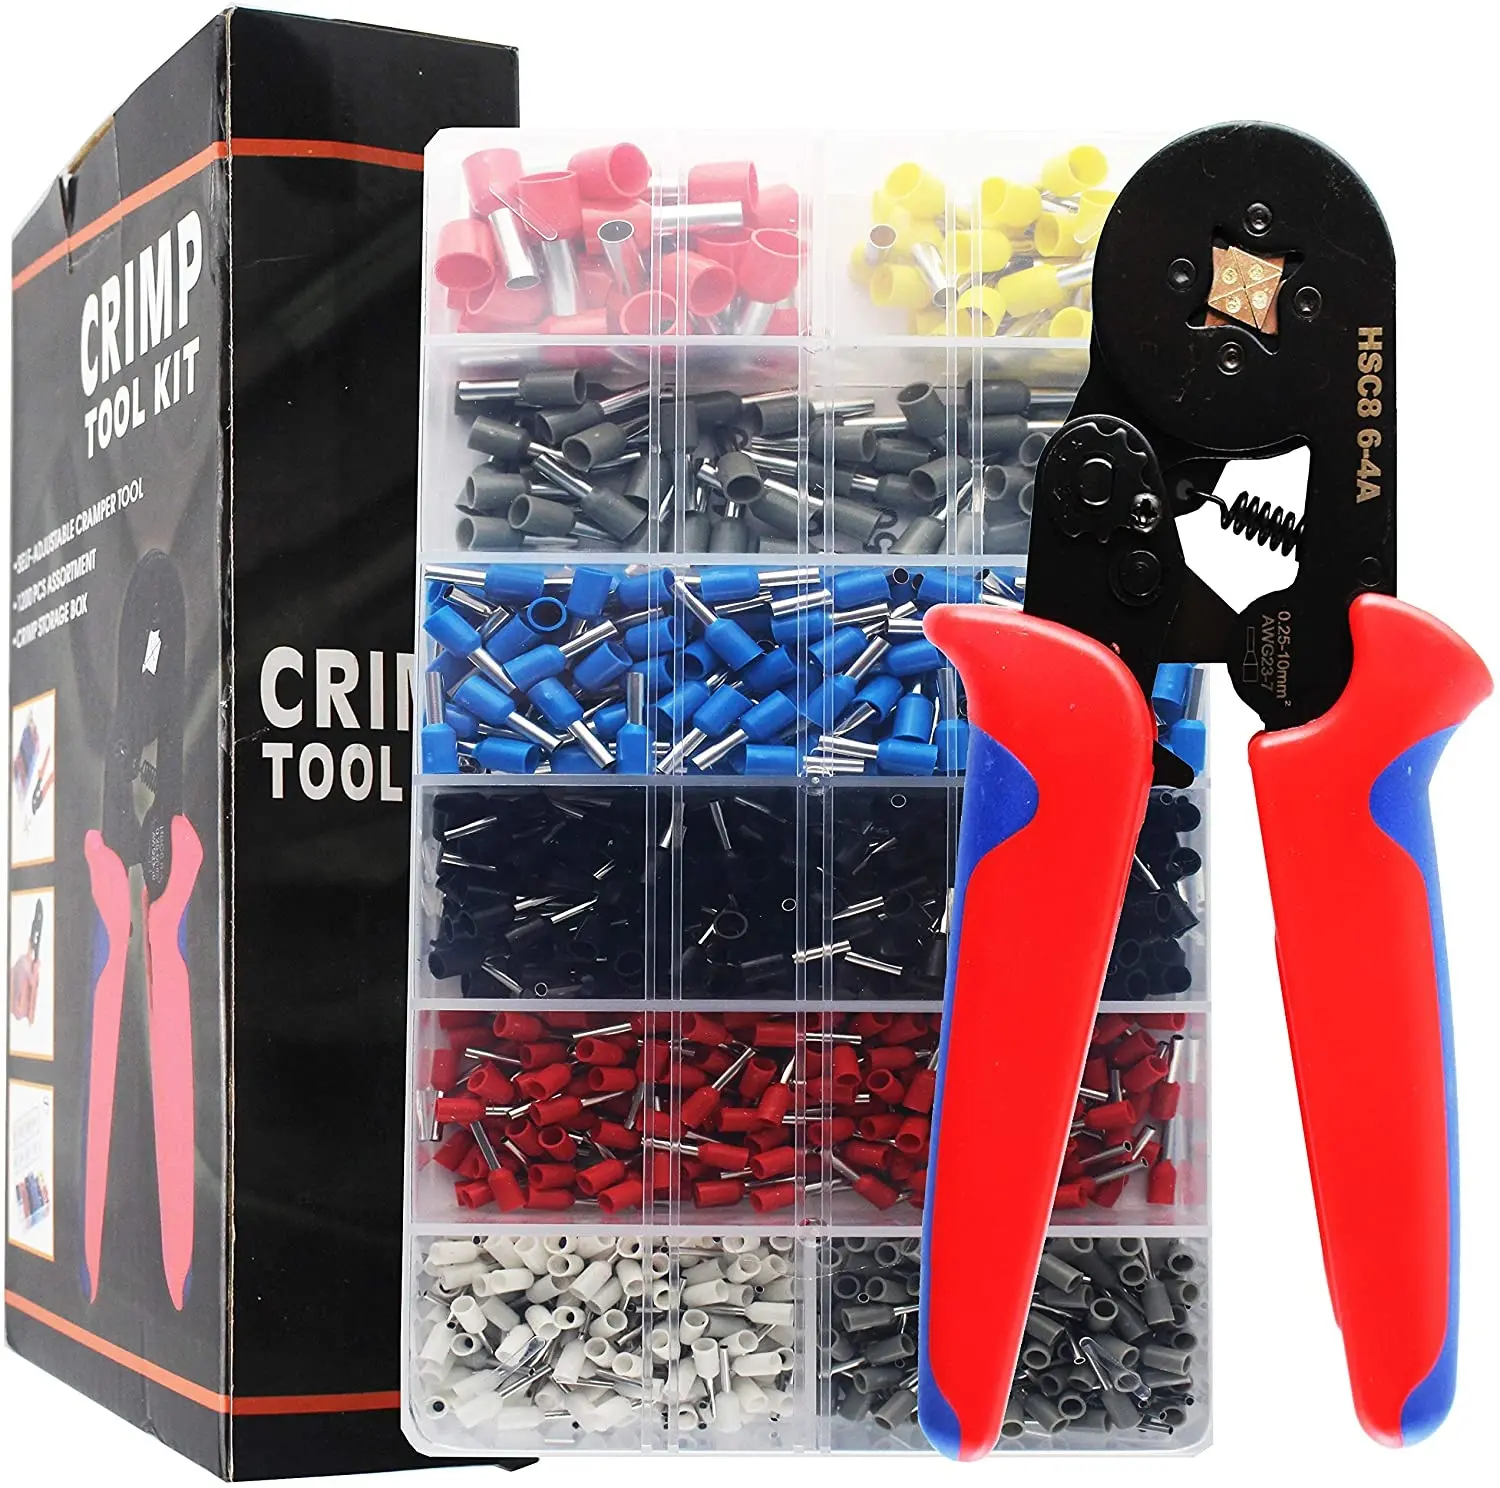 AWG23-7 Wire Crimping Tool Kit Ferrule Crimping Tool Kit Crimper Plier Set with 1200PCS Wire Terminals